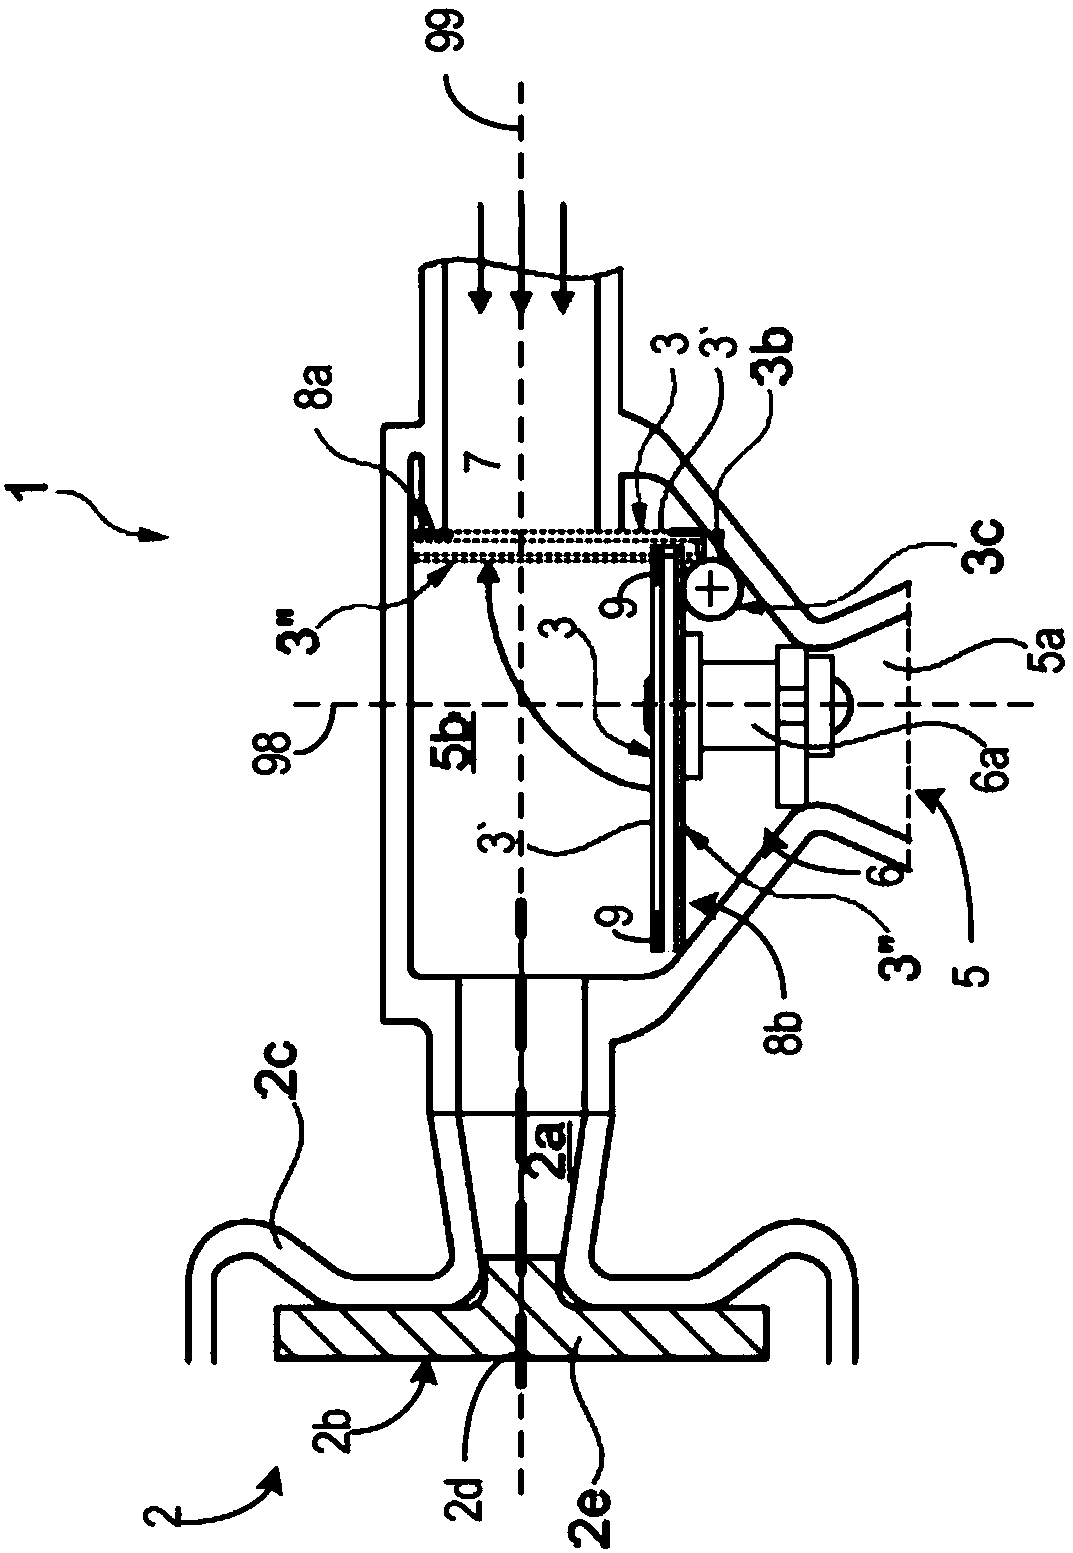 Supercharged internal combustion engine with compressor, exhaust-gas recirculation arrangement and flap